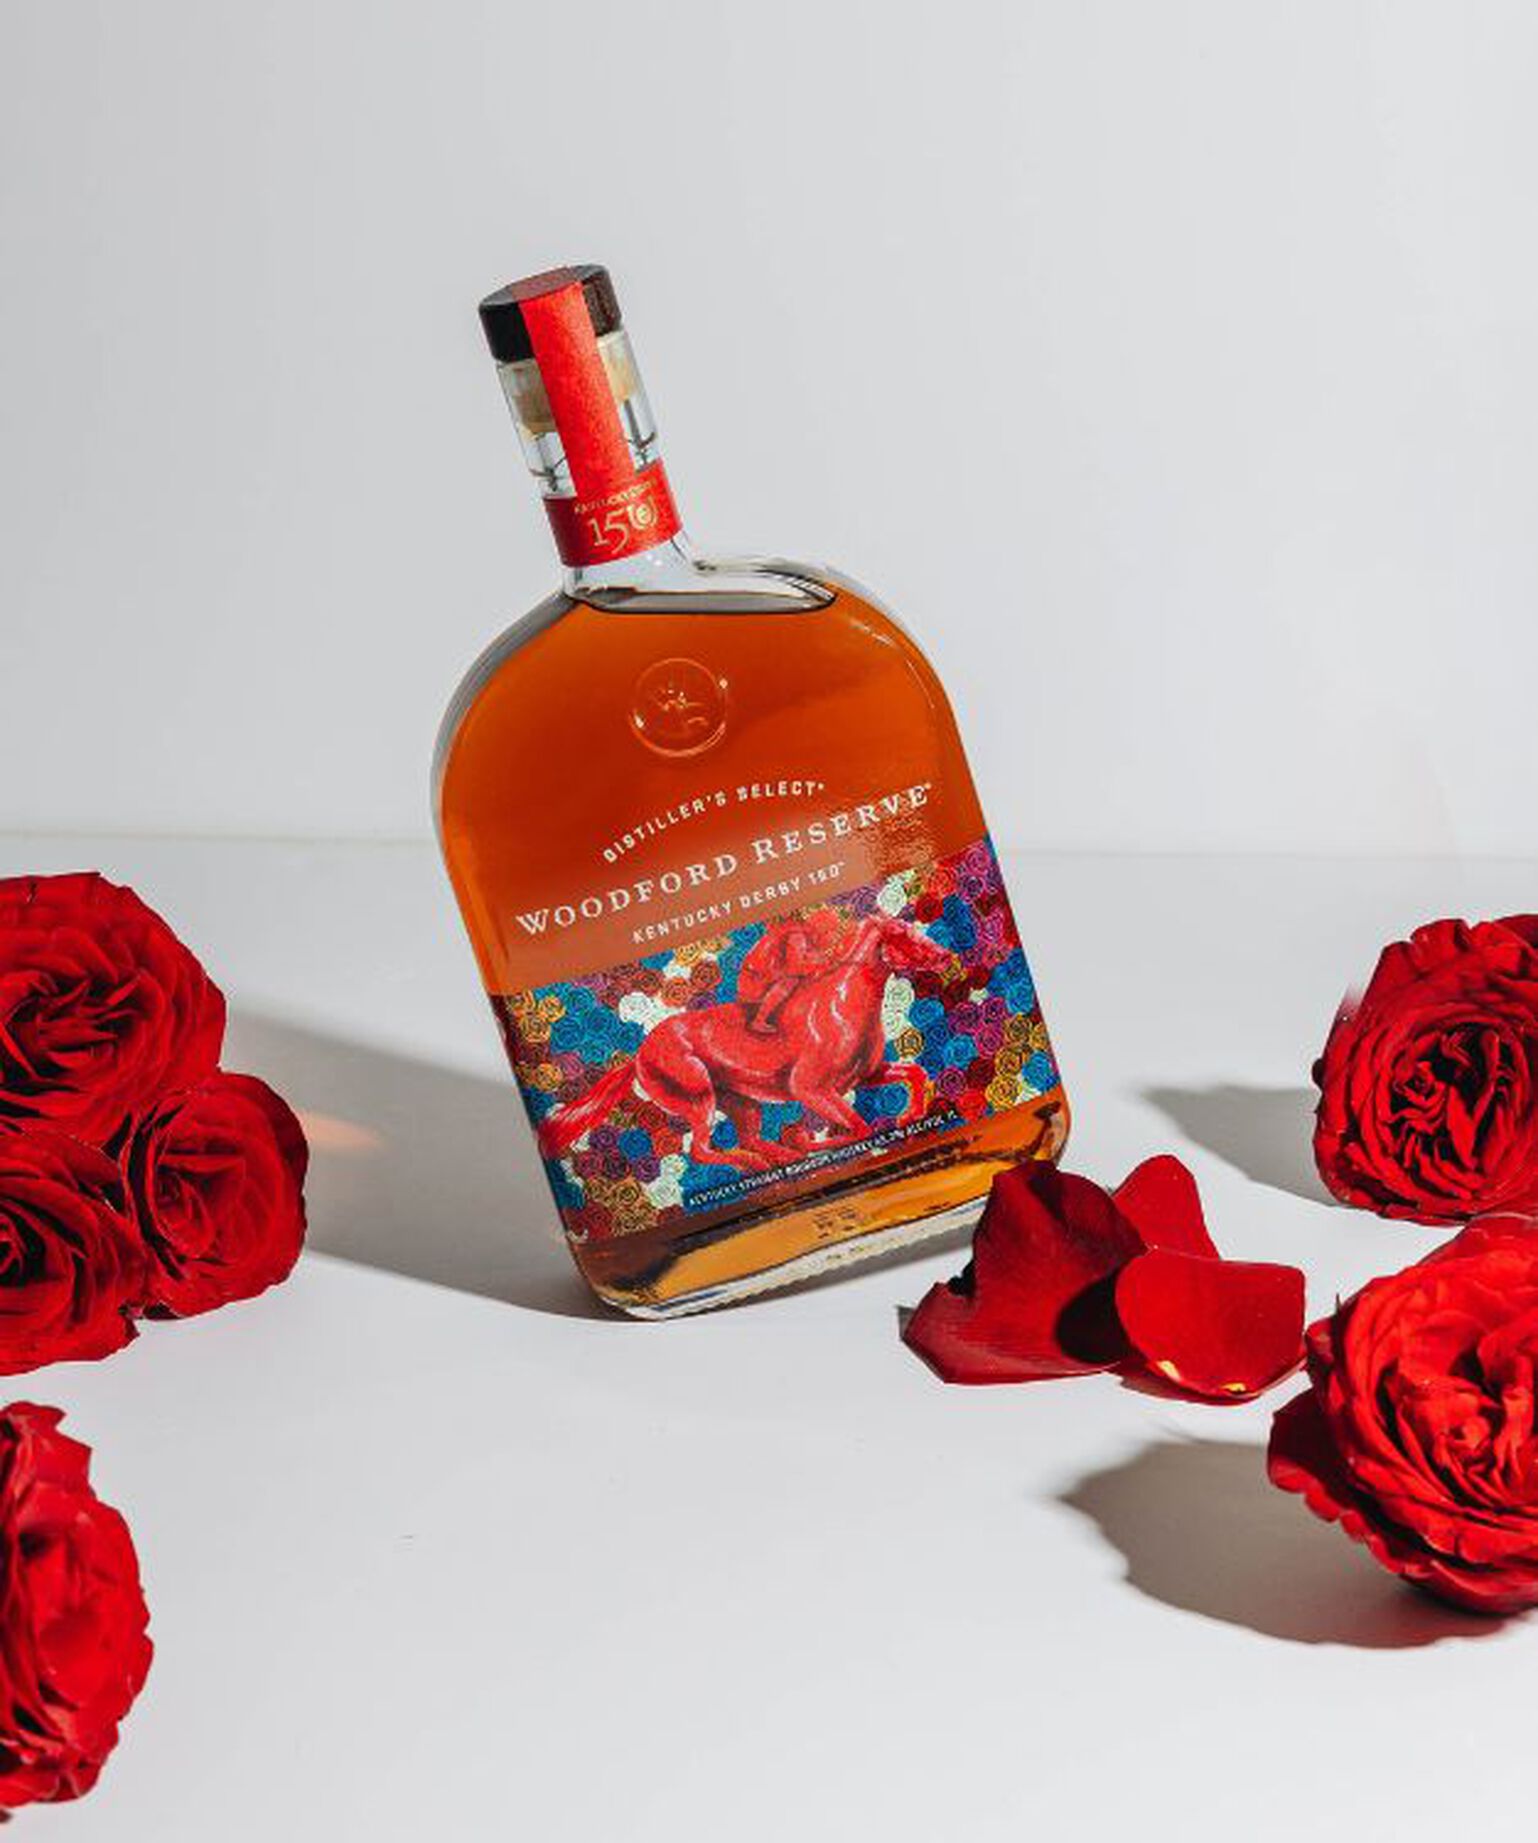 Image of Woodford Reserve Kentucky Derby bottle